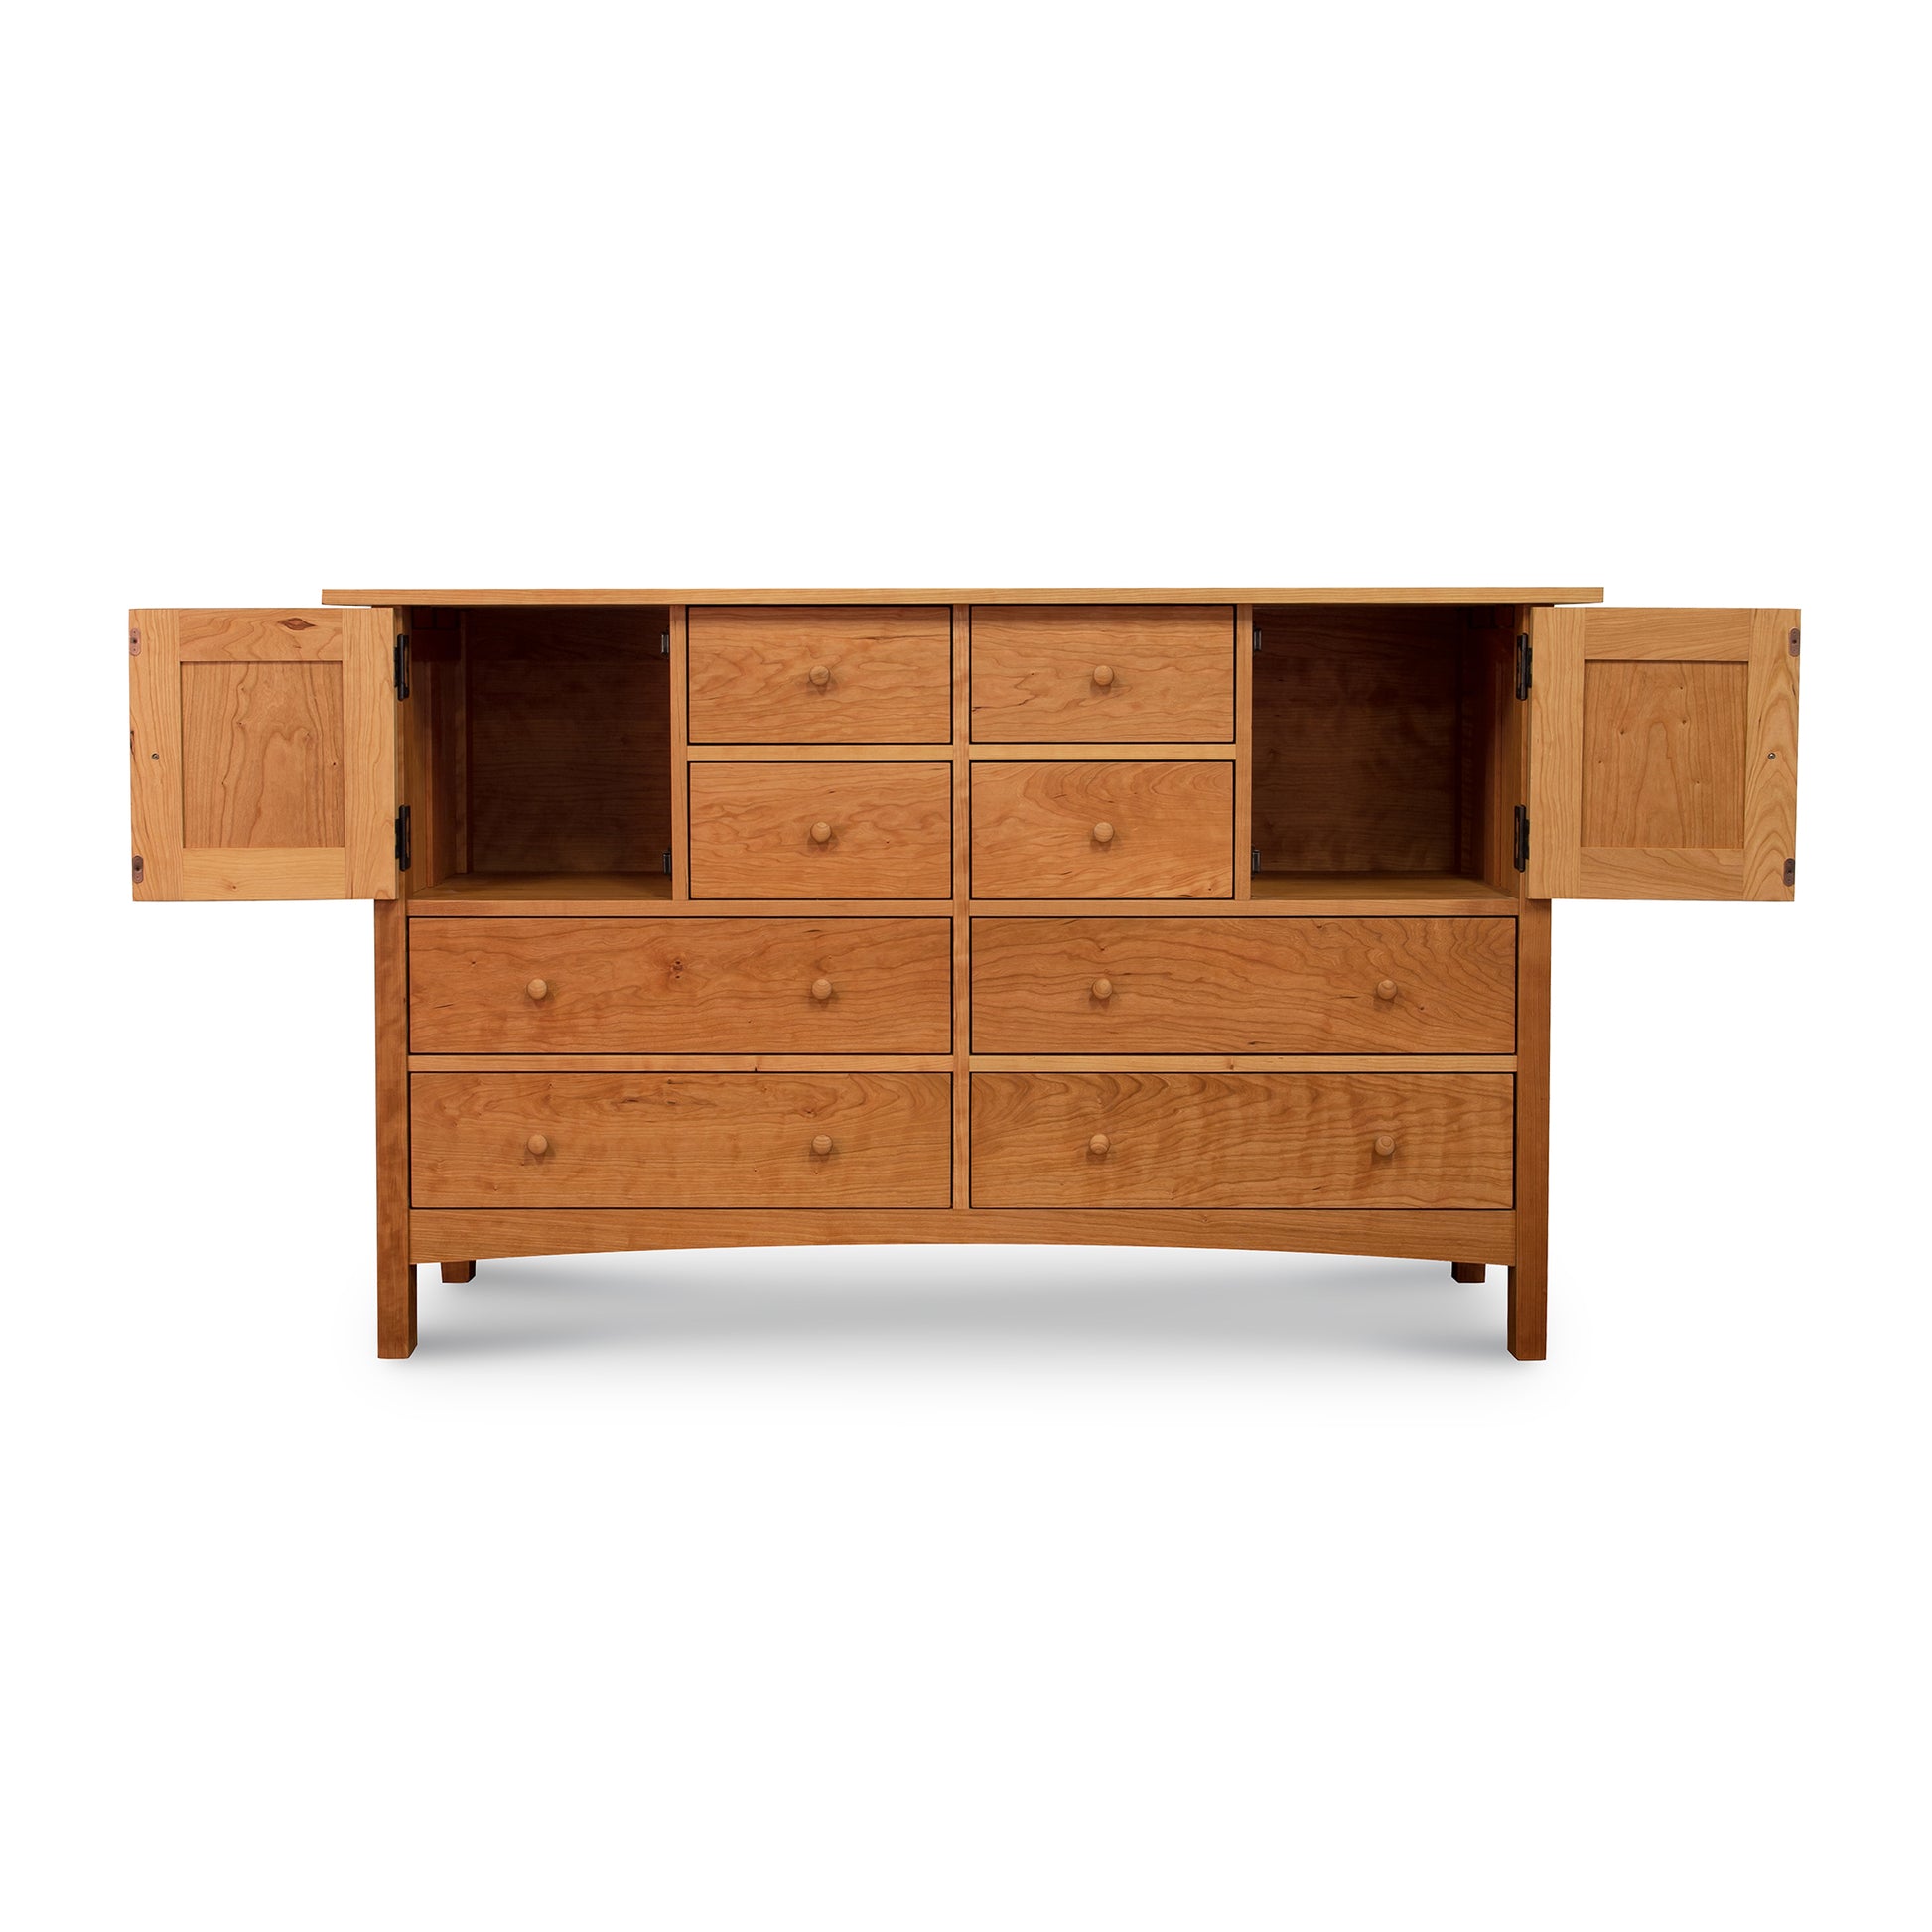 A luxury Vermont Furniture Designs Burlington Shaker 8-Drawer 2-Door Dresser, made of wood with drawers and doors.